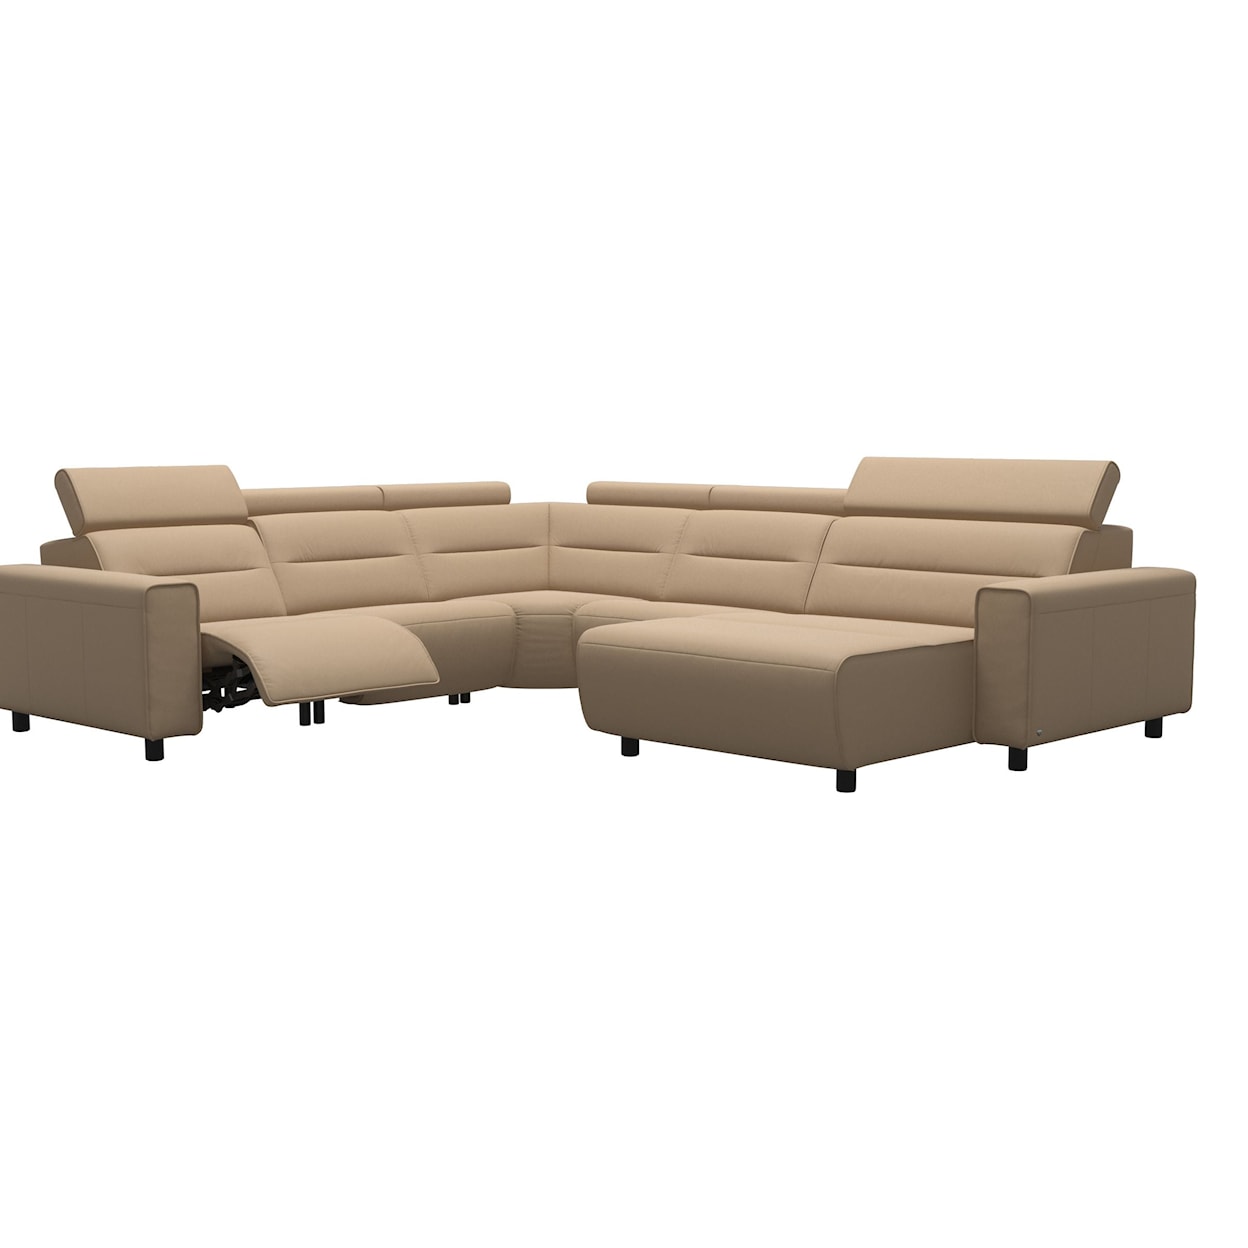 Stressless by Ekornes Emily 4-Seat Pwr Reclining Sectional w/ Chaise